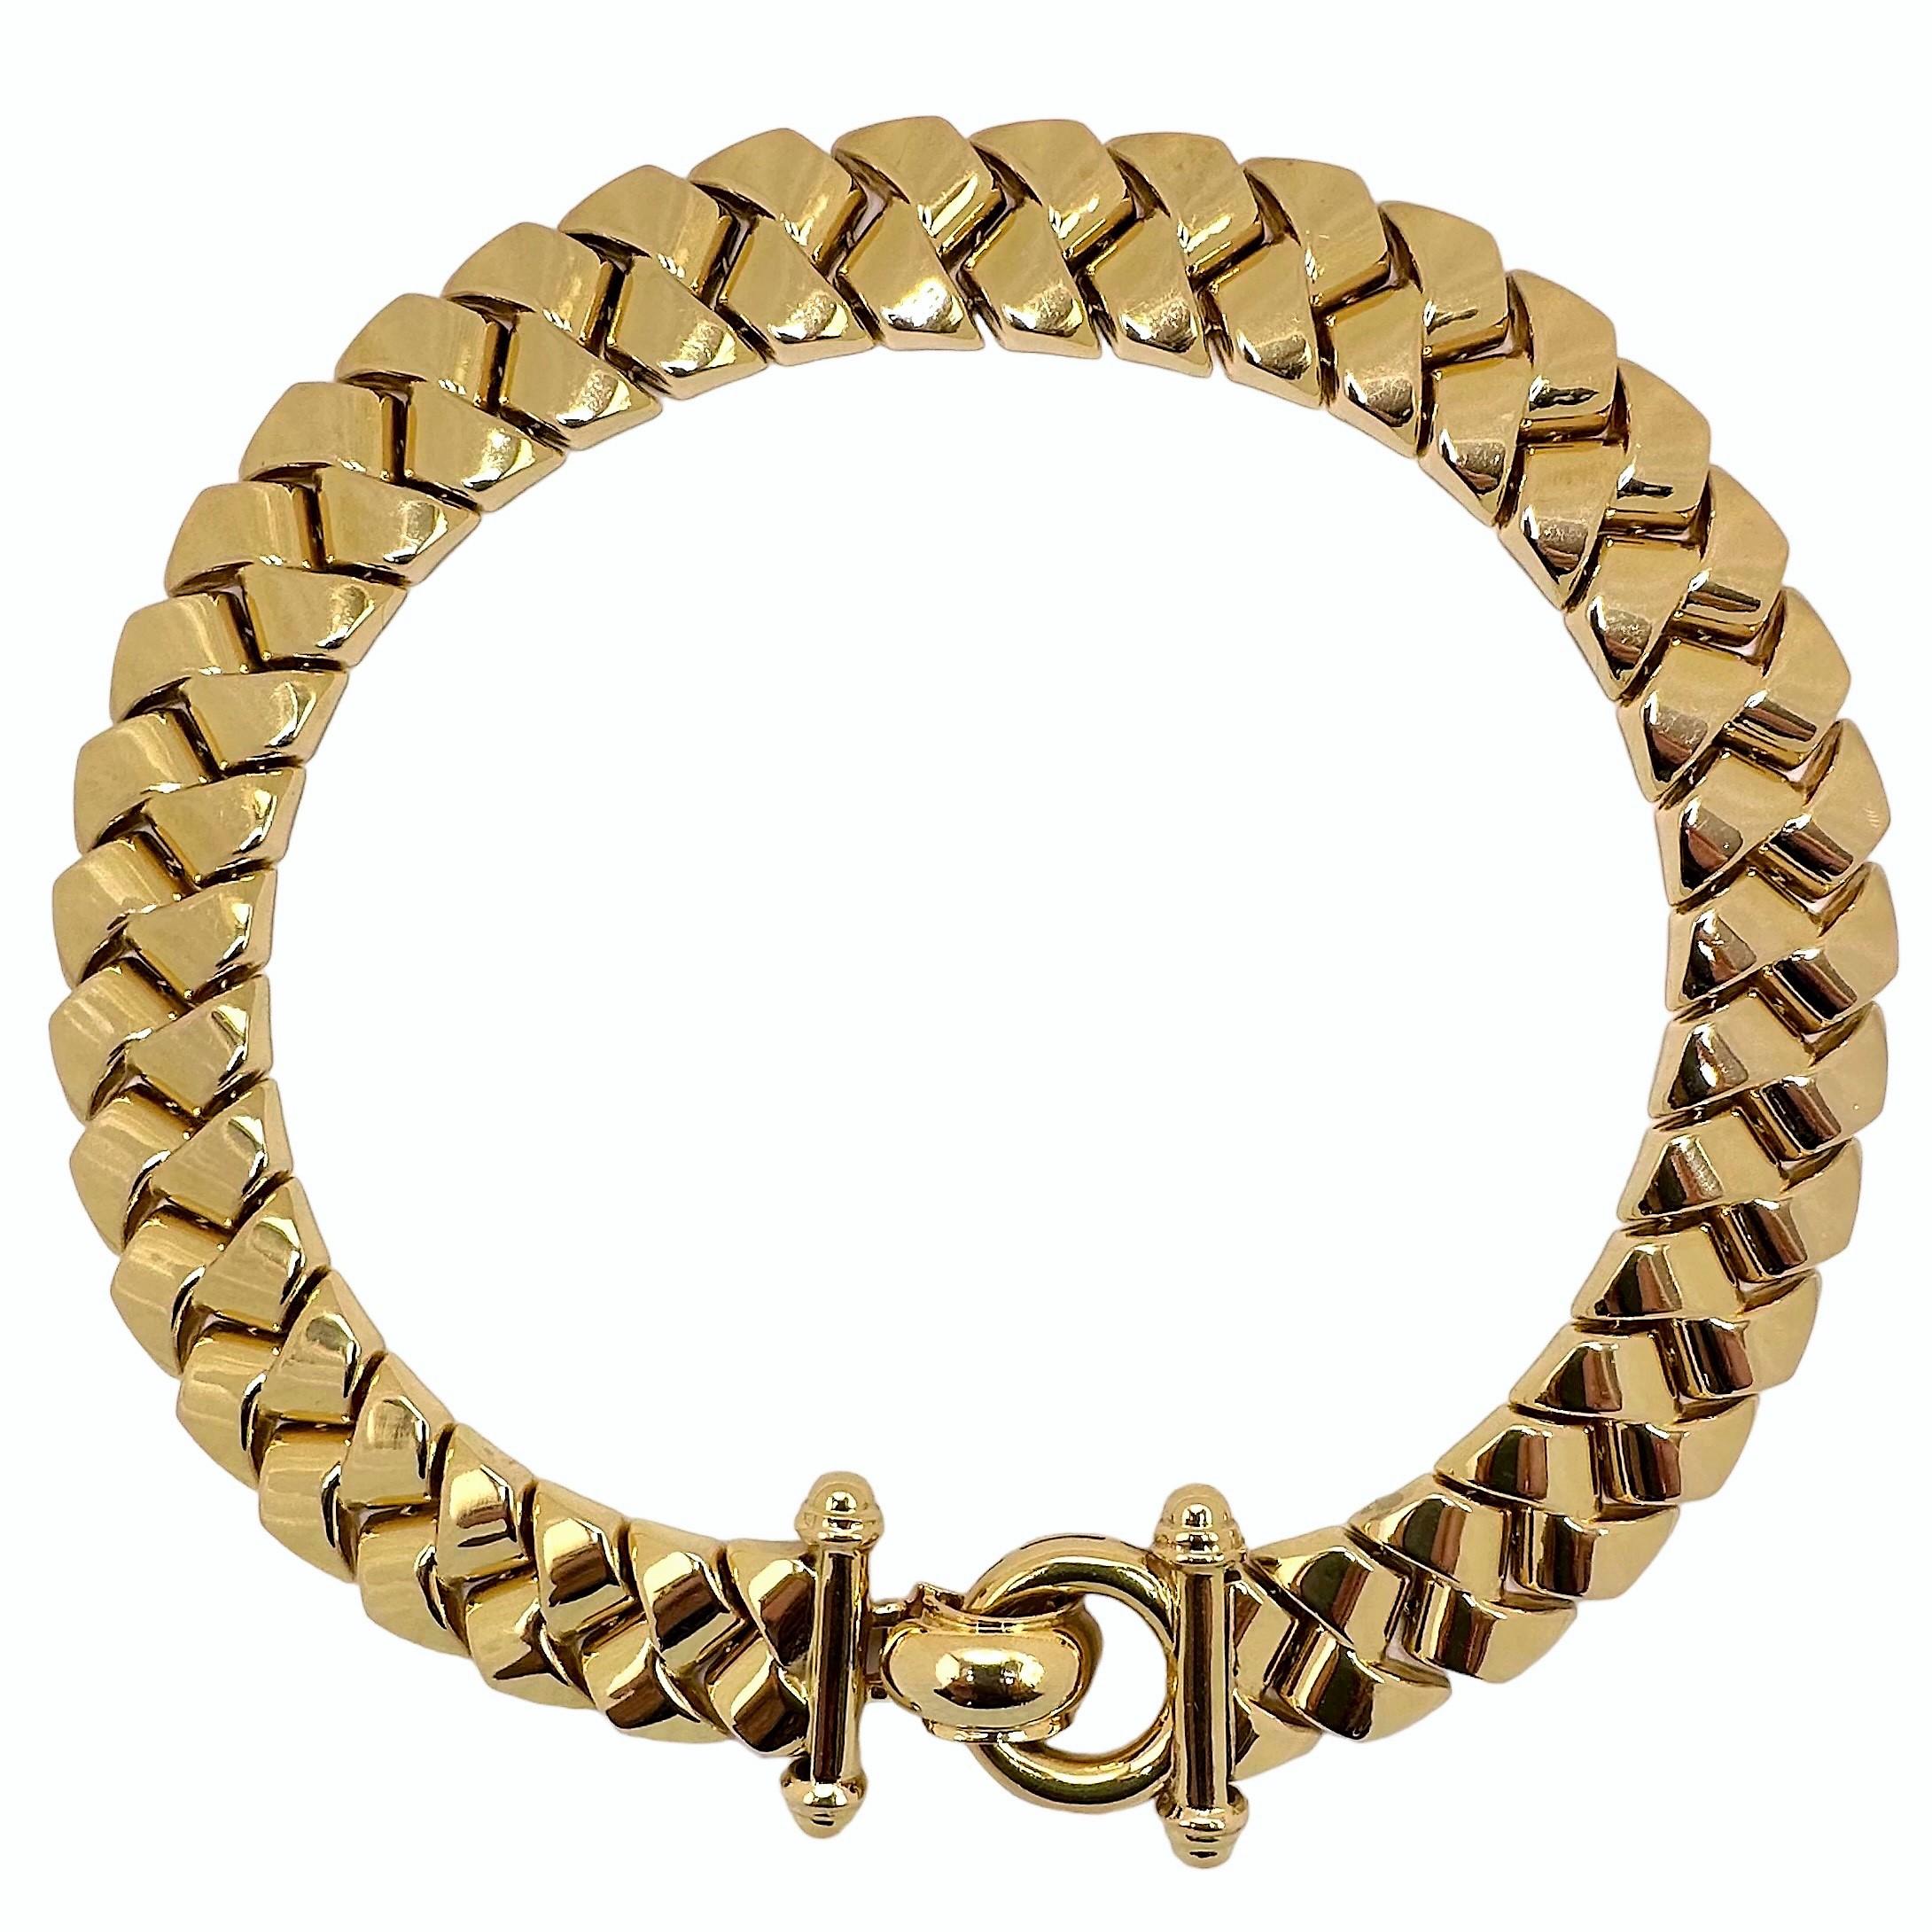 This late-20th Century heavy gauge hollow Italian 14K yellow gold braided link choker necklace is very substantial in appearance and is extremely comfortable to wear. Measures 15 inches long by 11/16 inch wide. The dramatic ring and flip clasp can